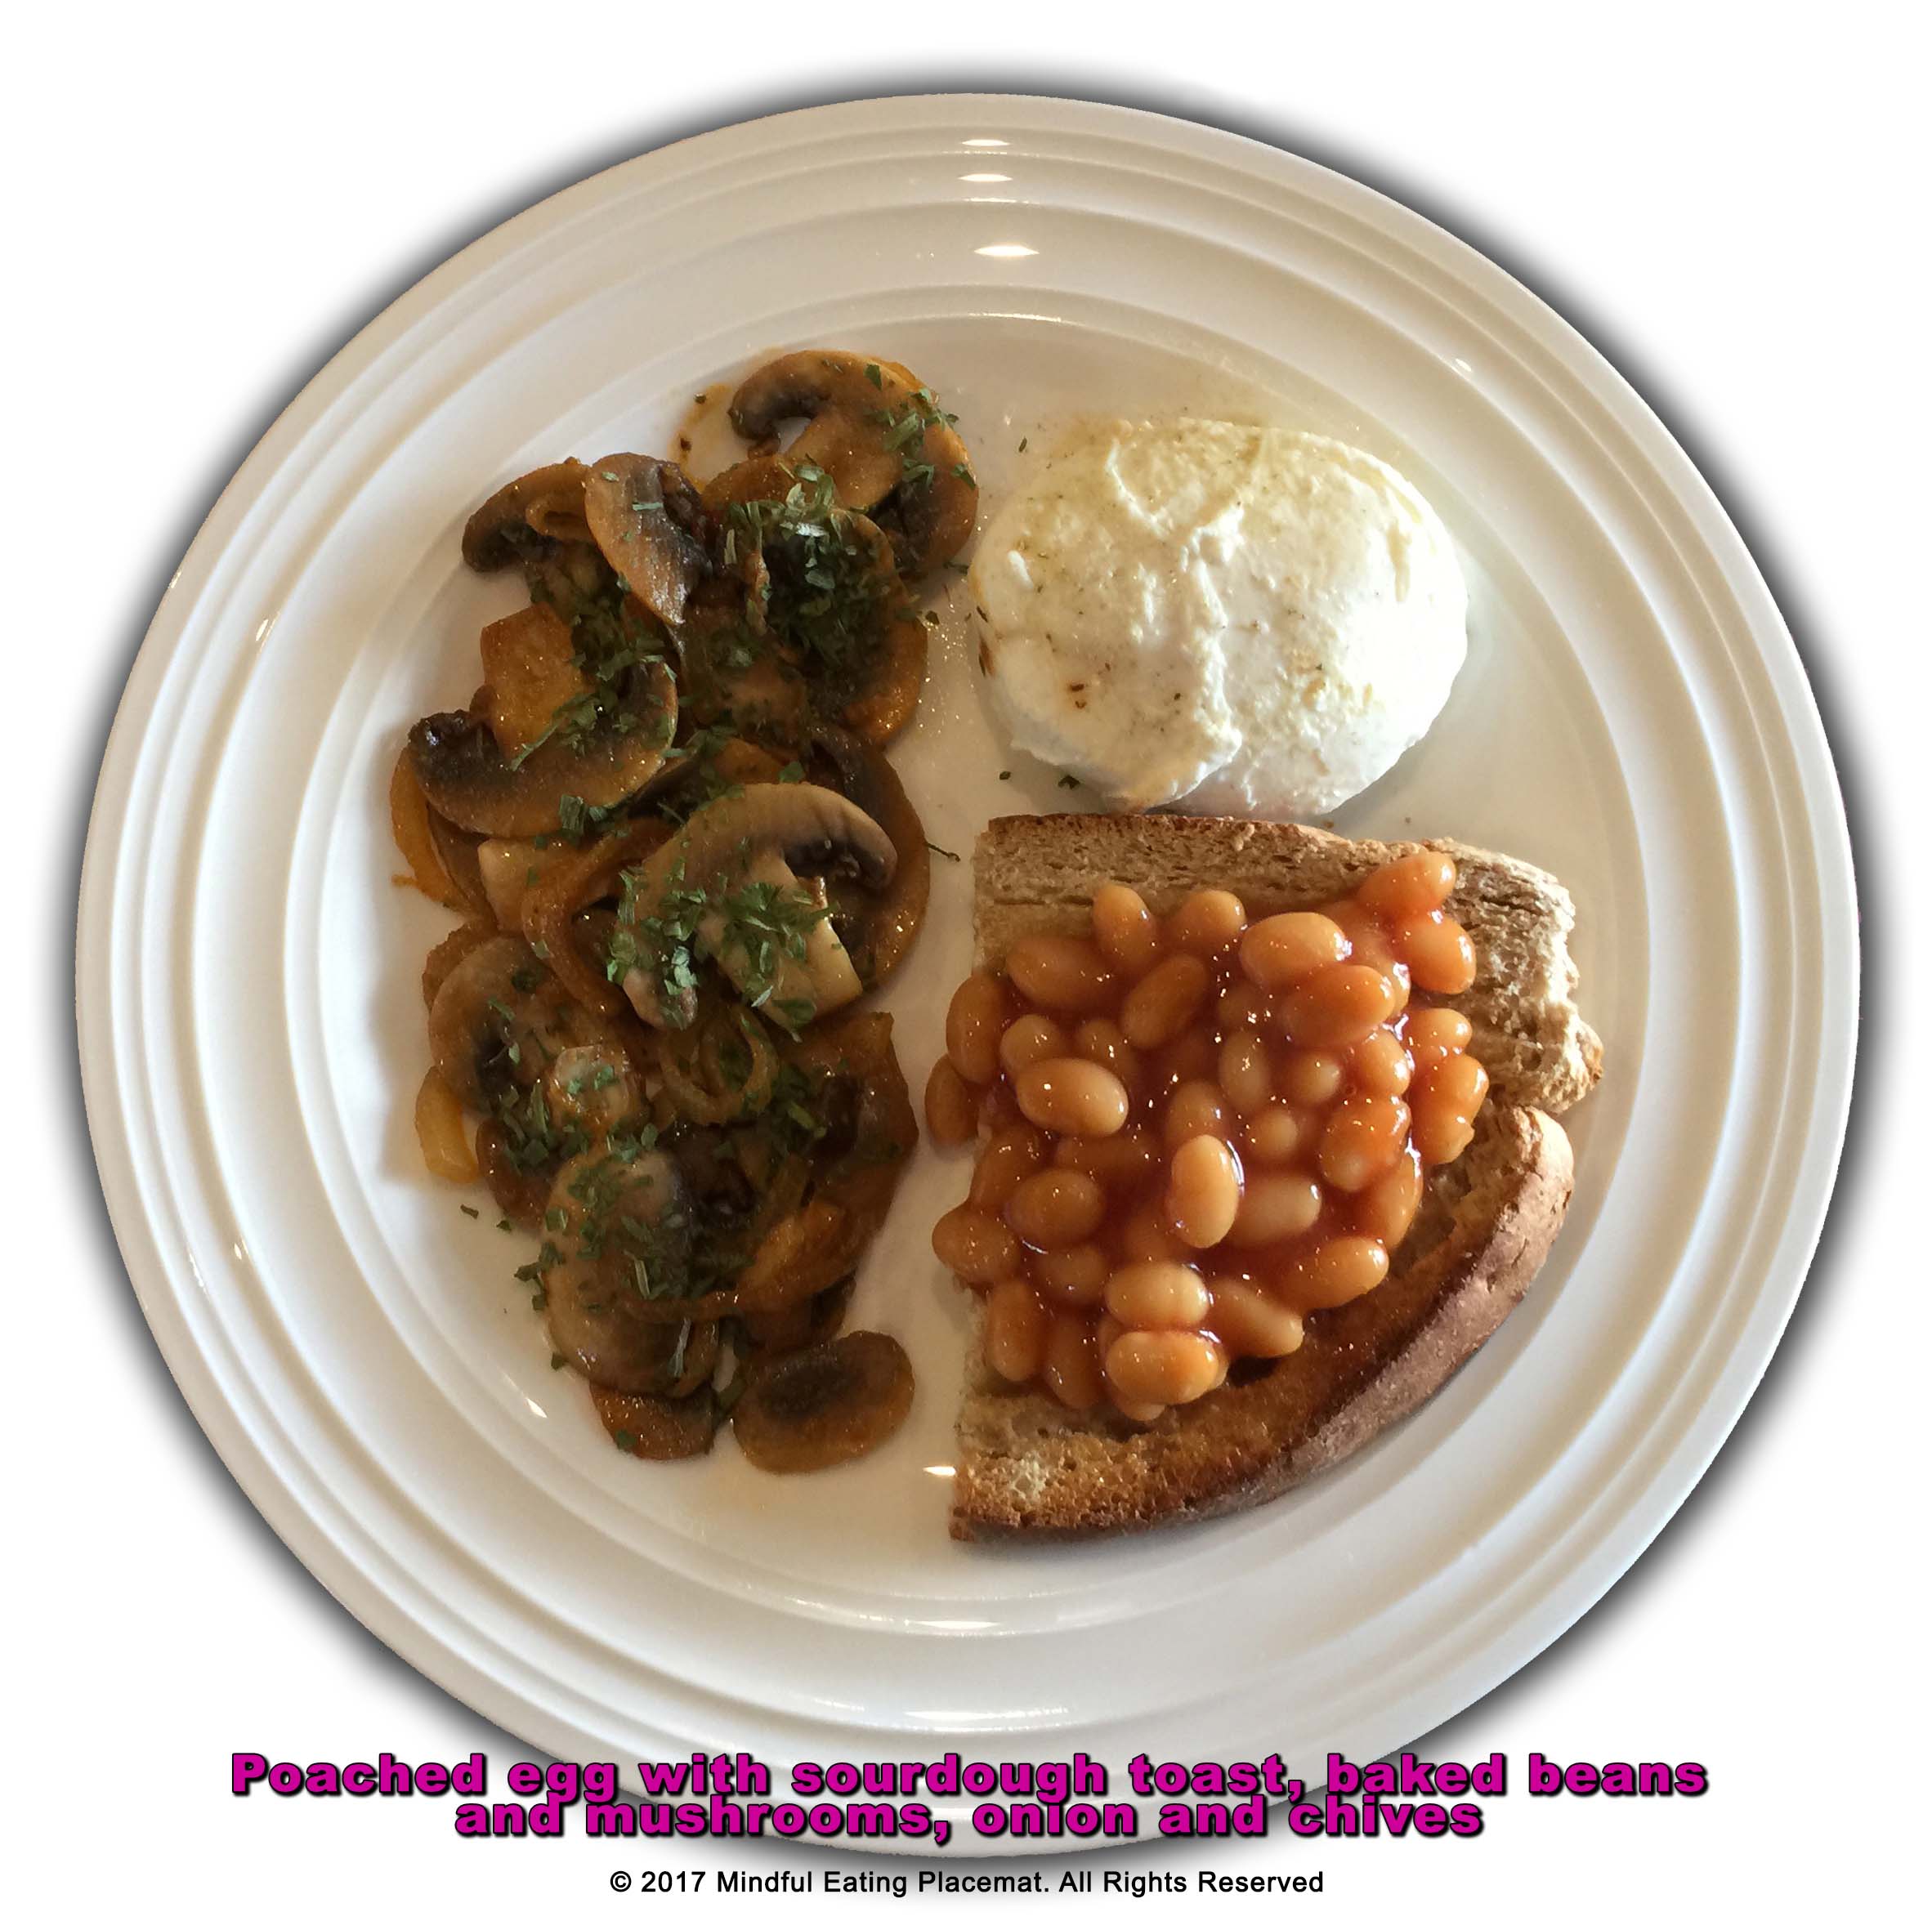 Poached egg with sourdough toast and baked beans with a side of mushrooms